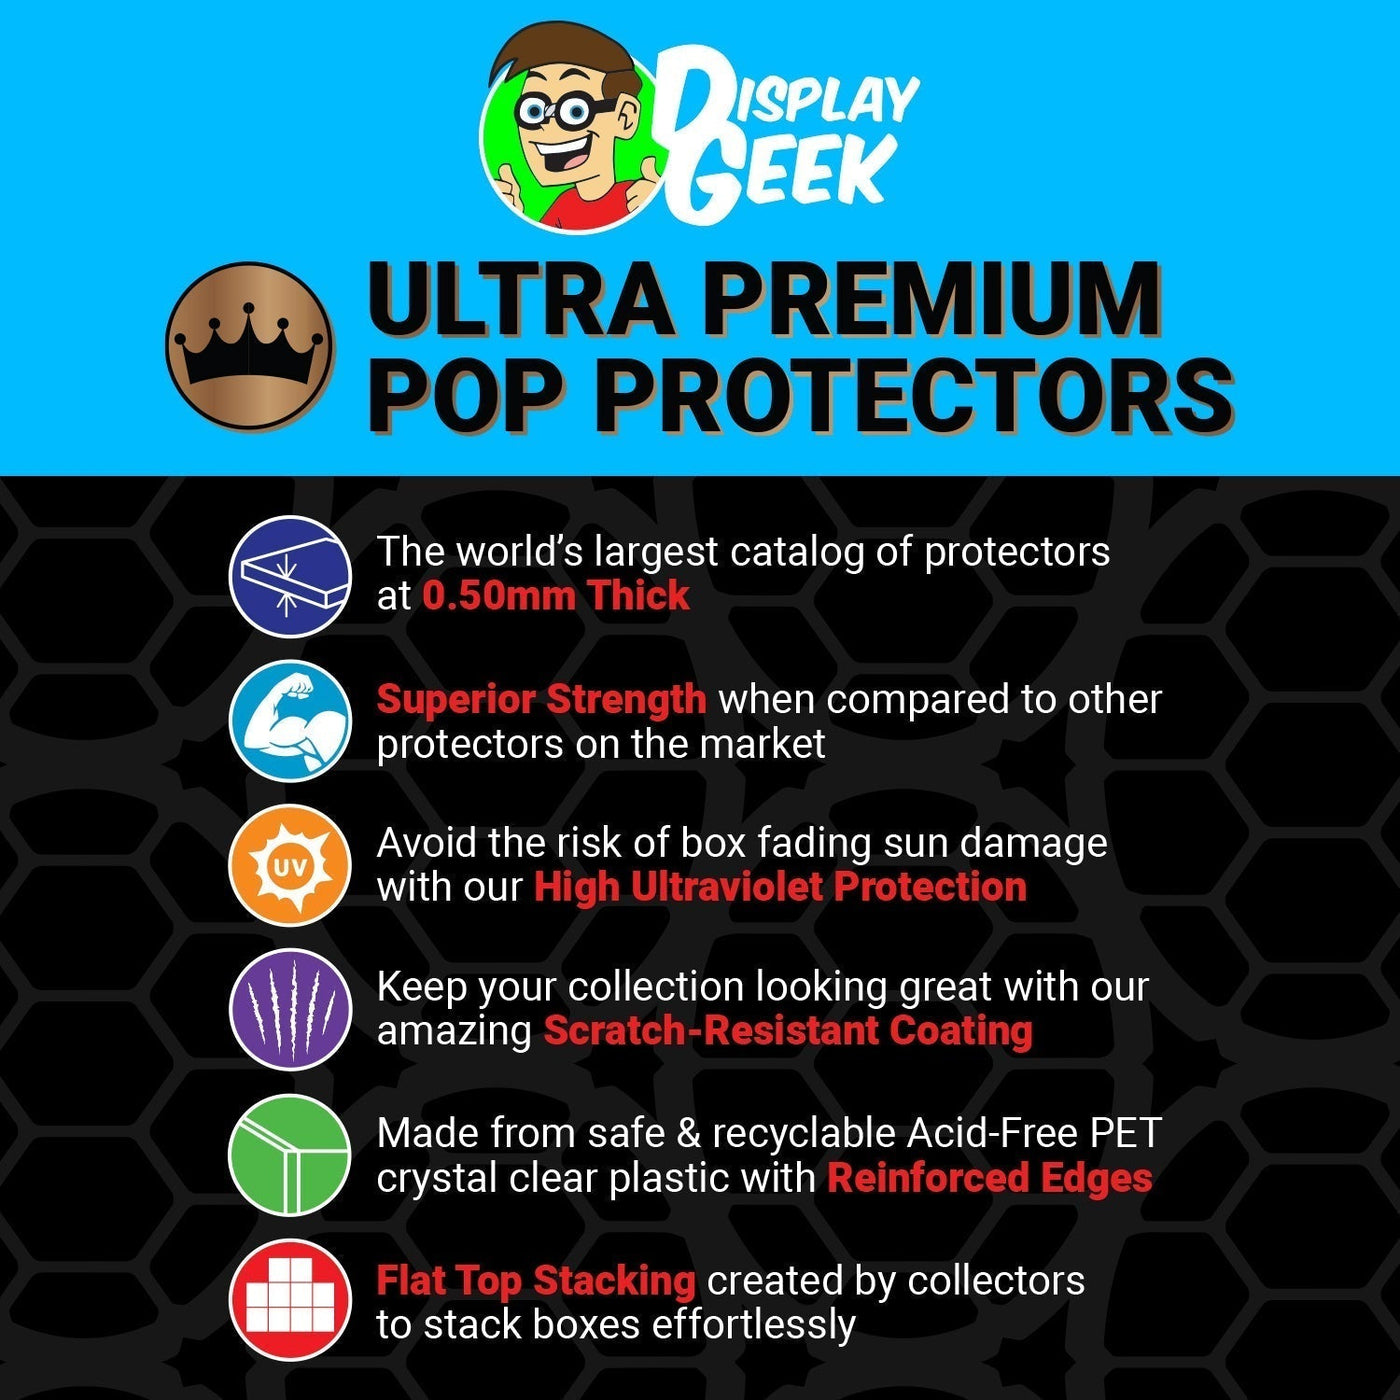 Pop Protector for 6 inch Goliath #41 Super Funko Pop on The Protector Guide App by Display Geek